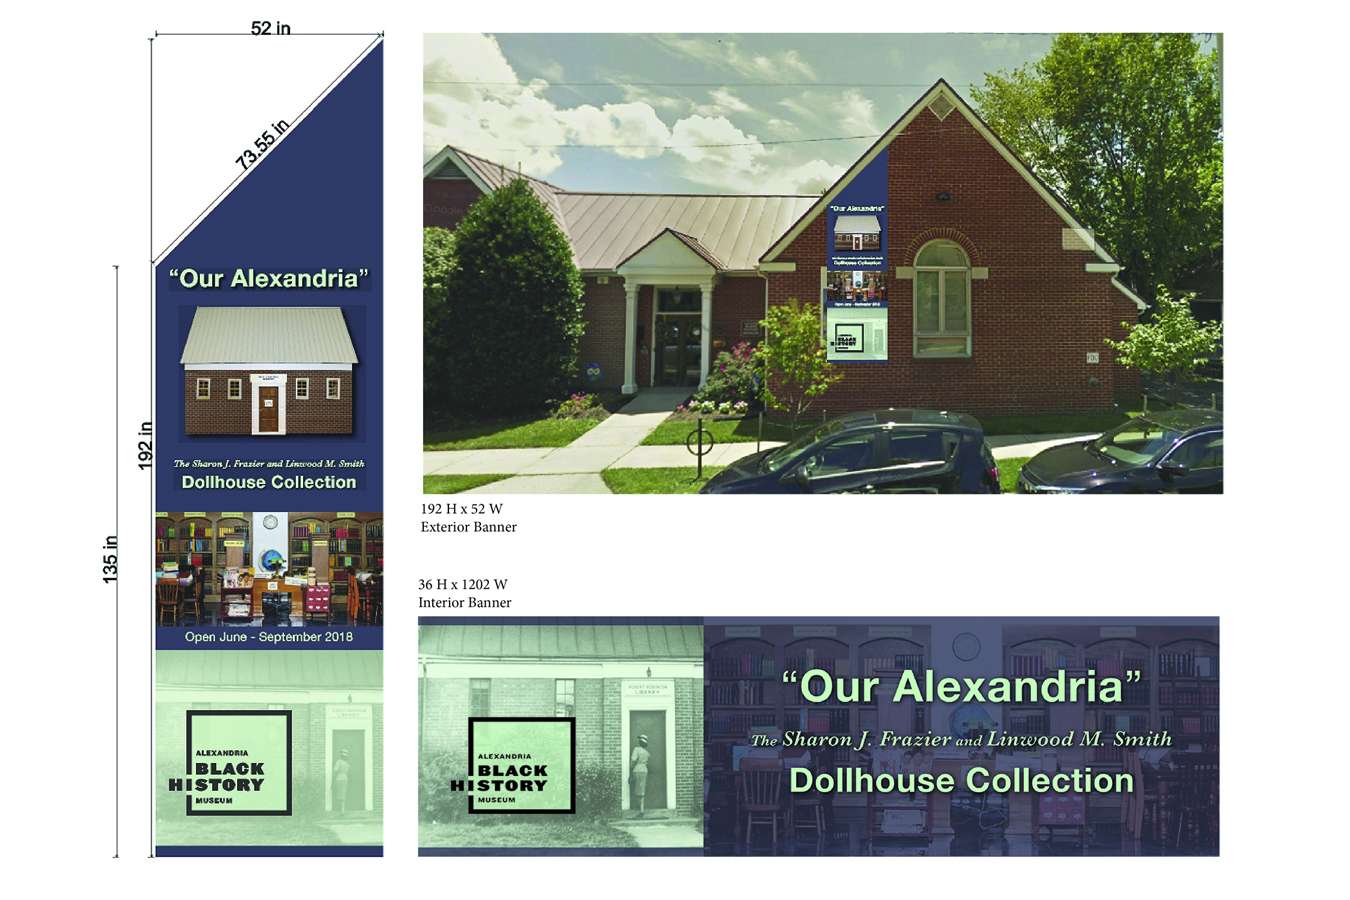 Dollhouse Banners : Exterior and Interior Banners 